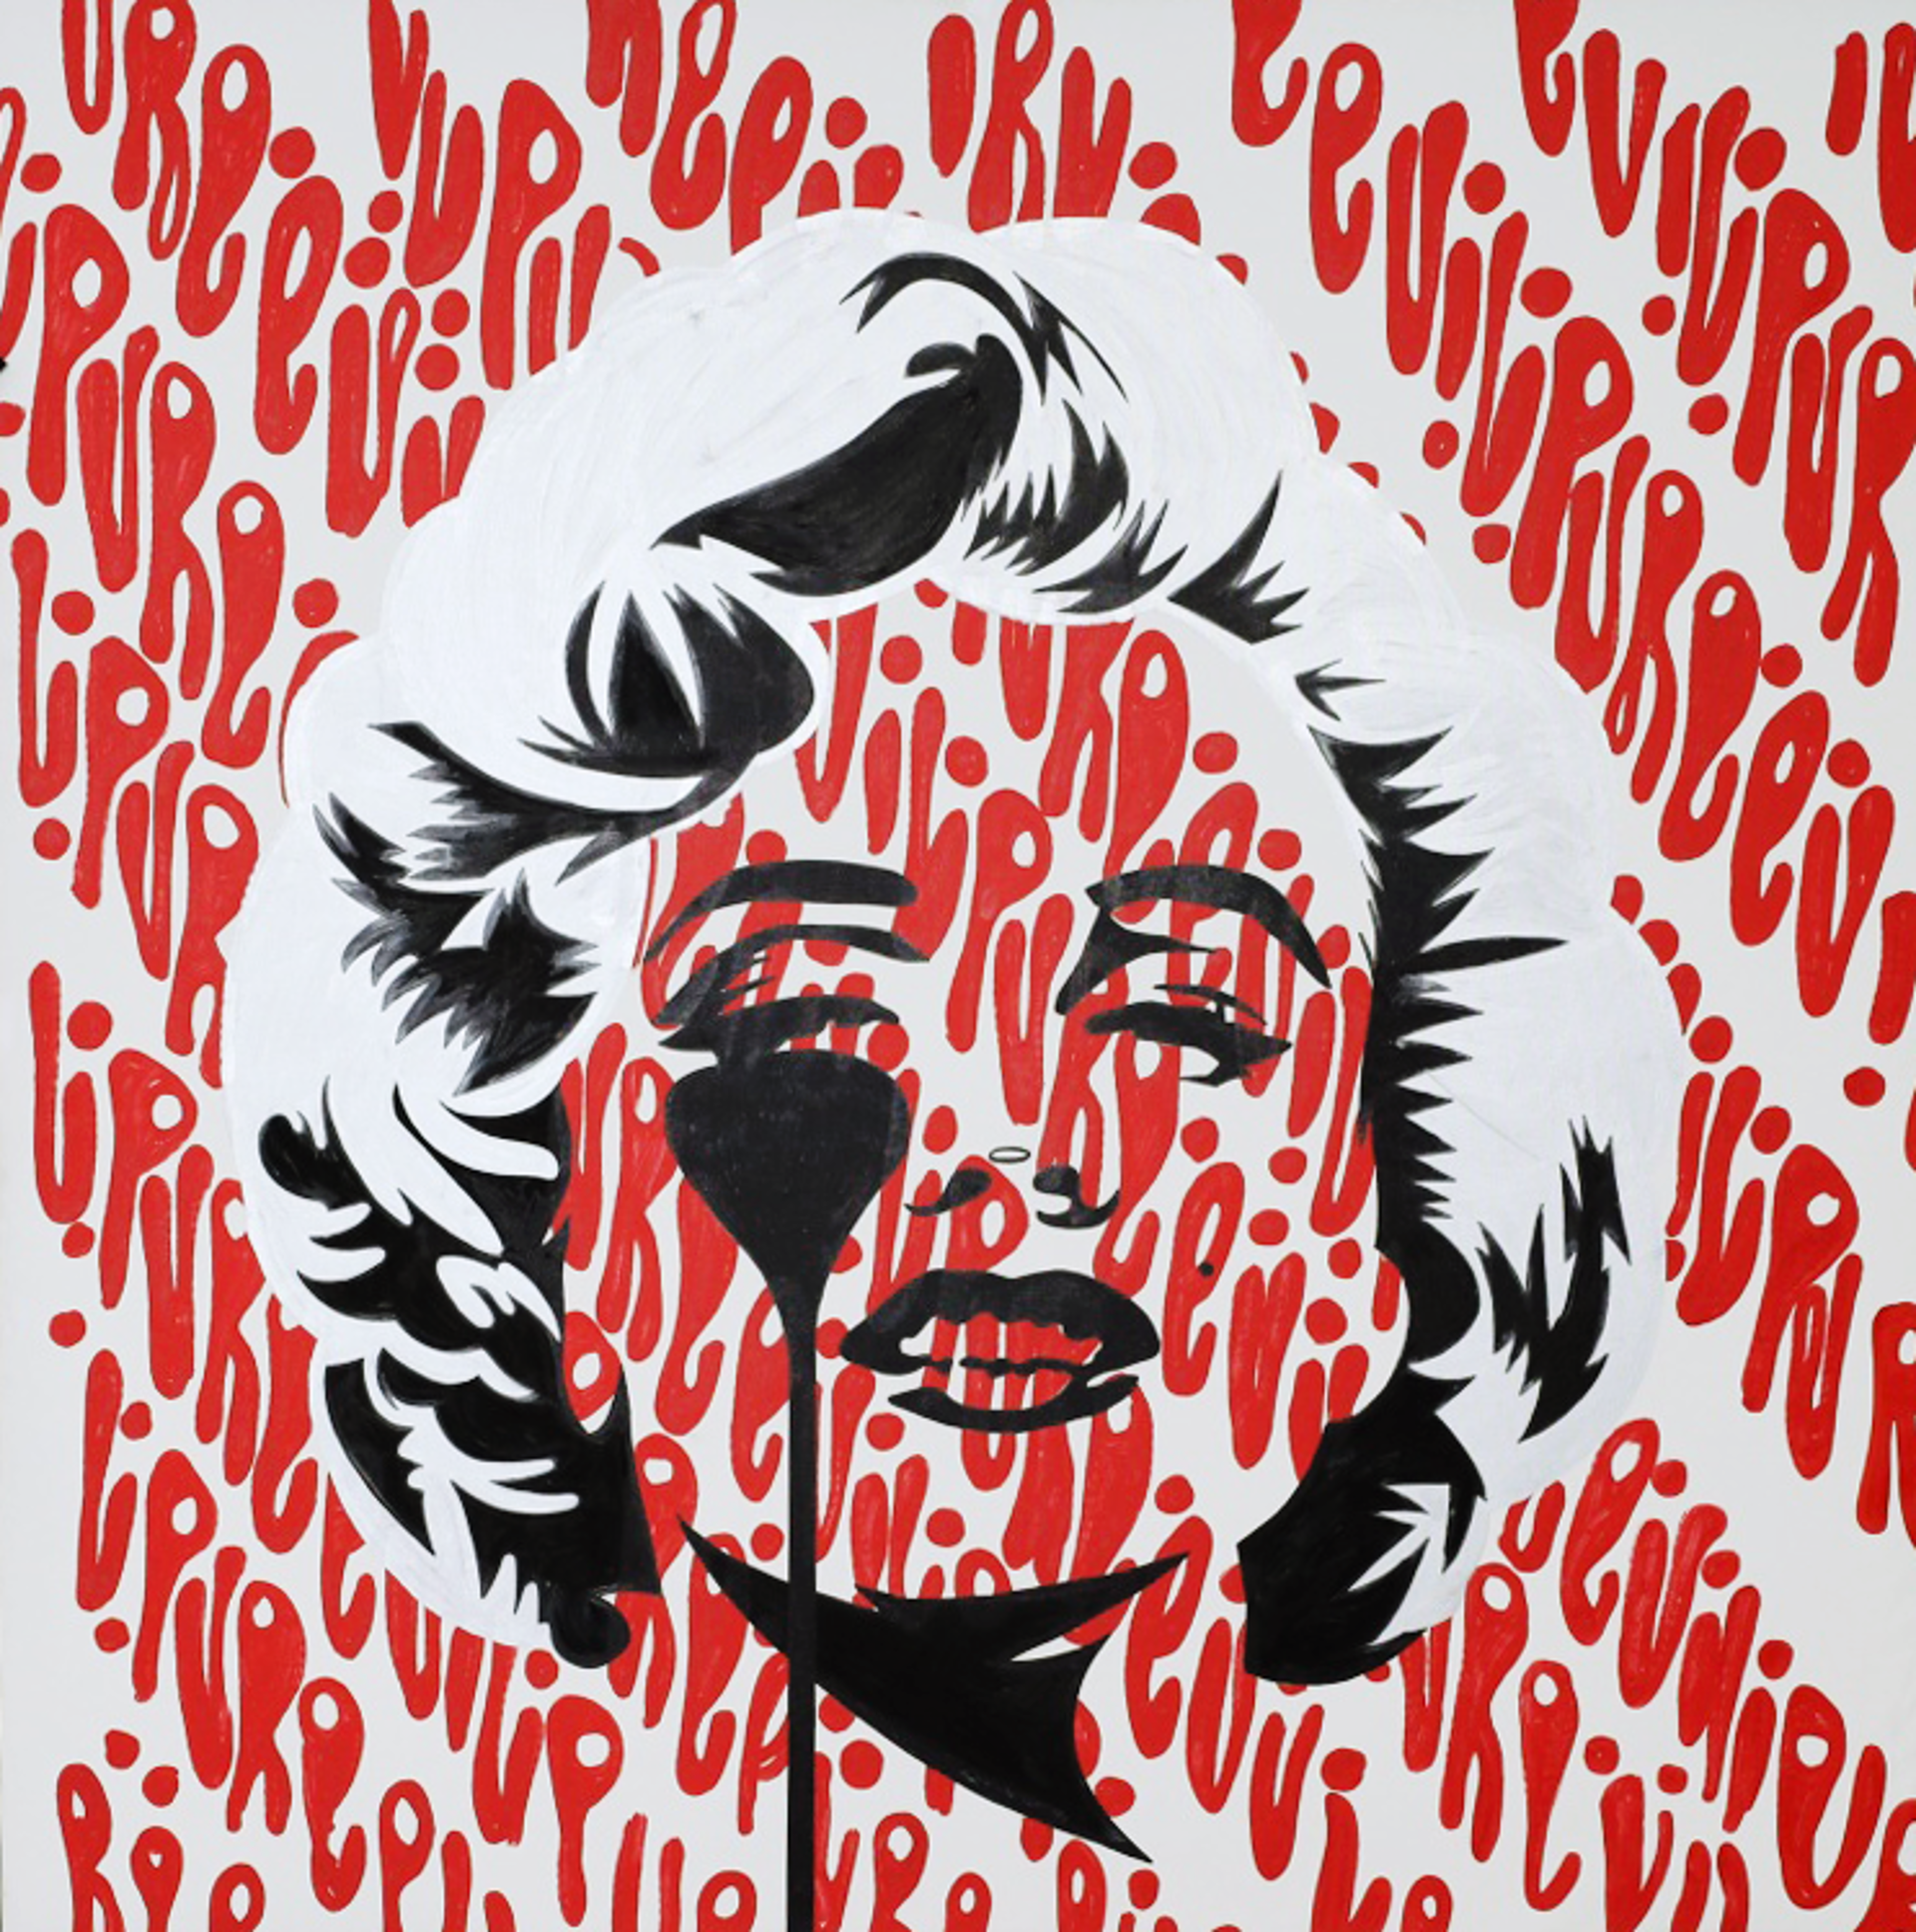 I Dream of Mega Marilyn by Pure Evil